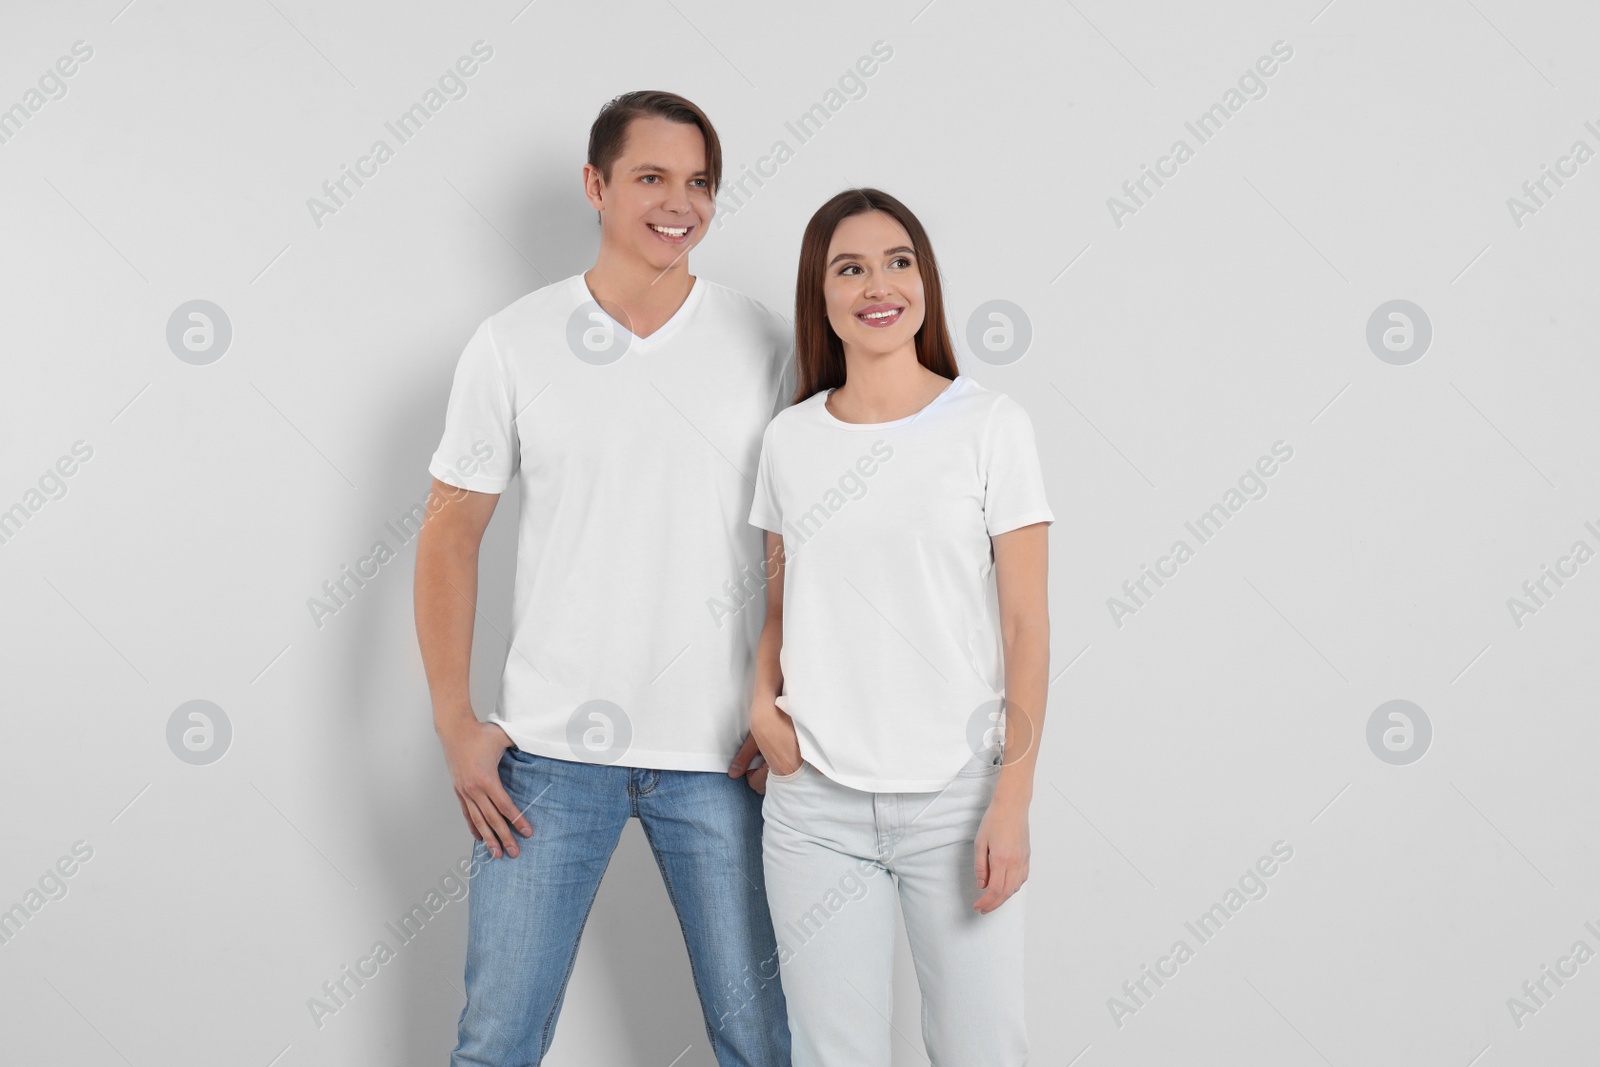 Photo of Young couple in stylish jeans on light background